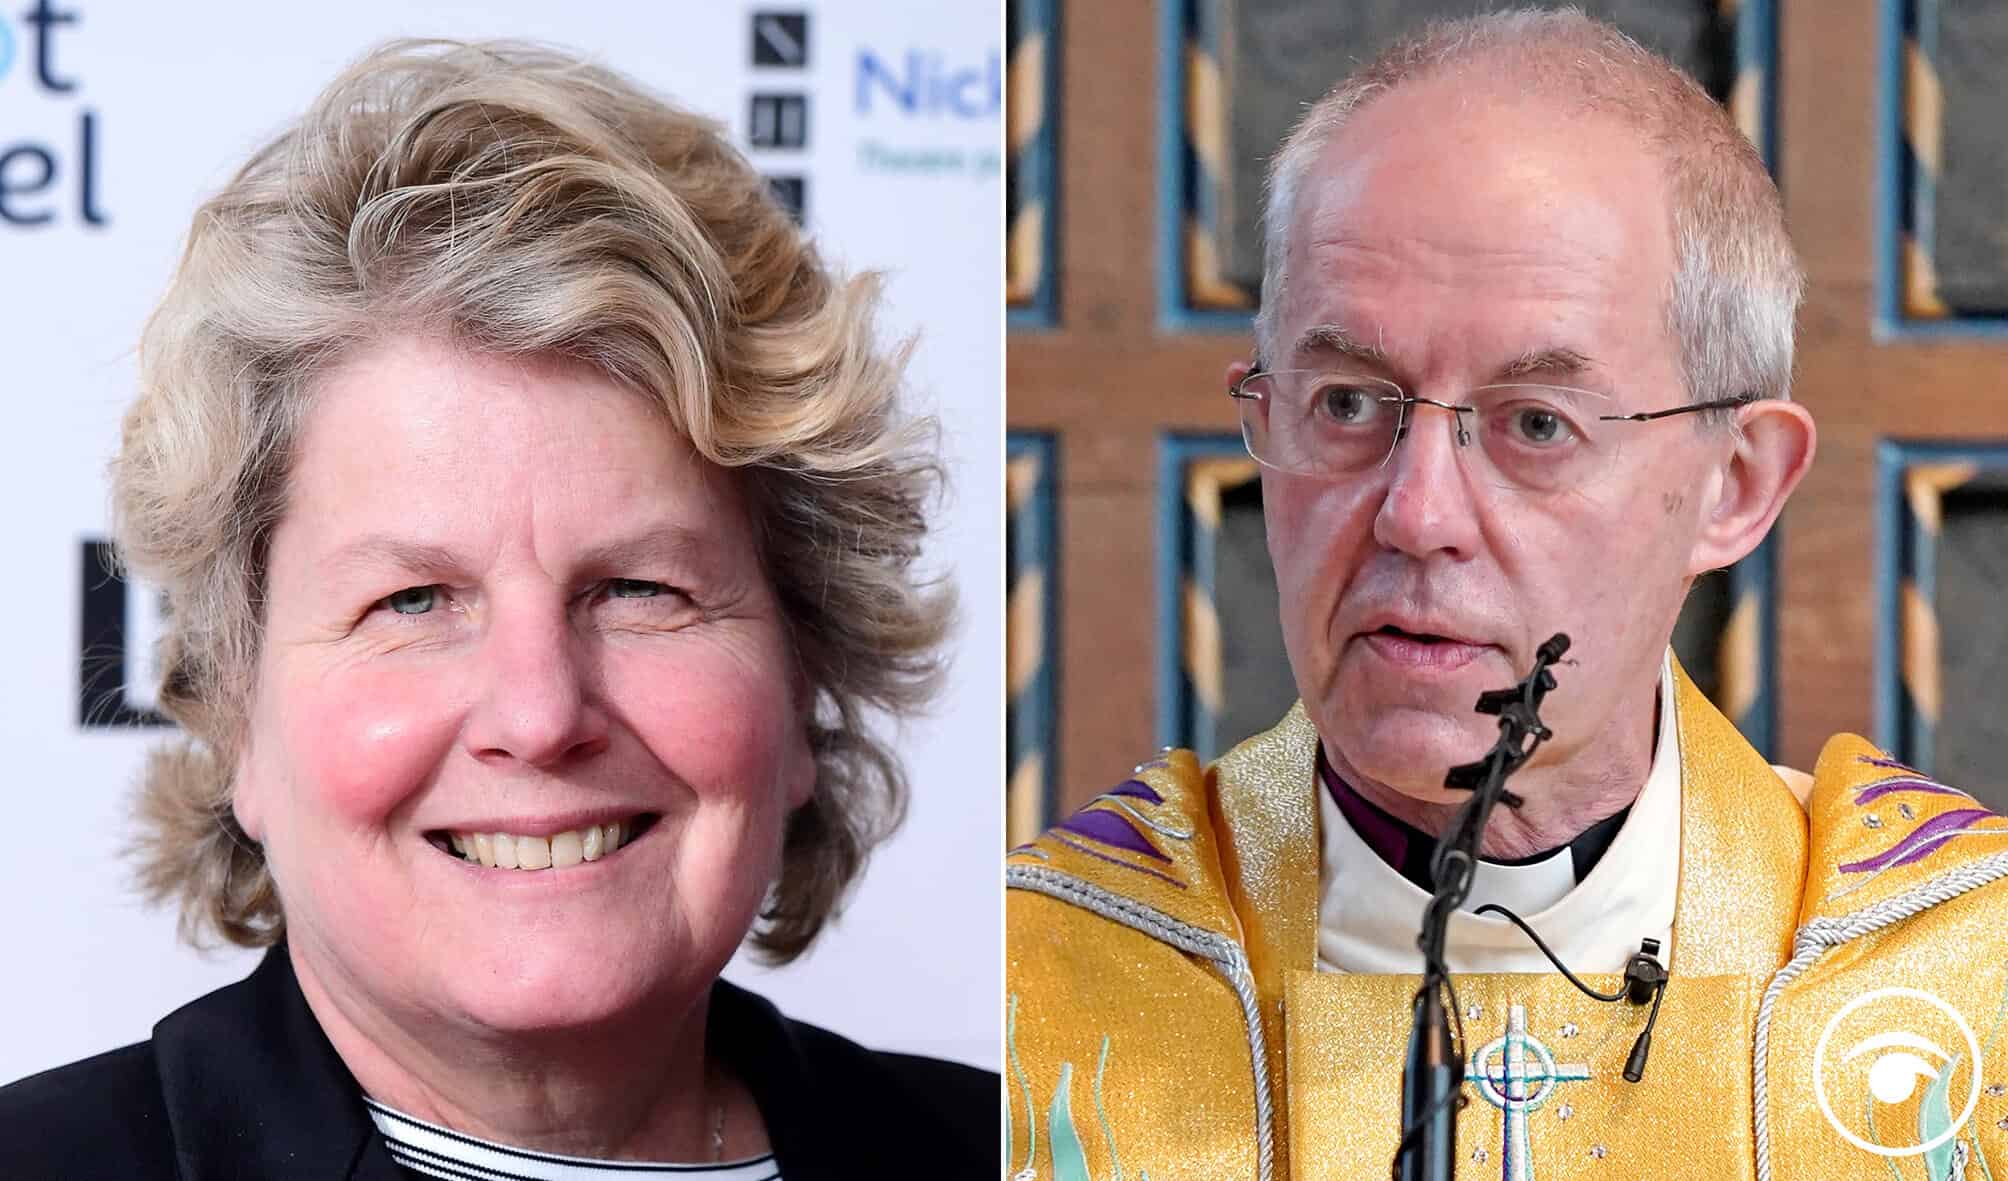 Sandi Toksvig’s damning open letter to Archbishop of Canterbury over same-sex marriage declaration